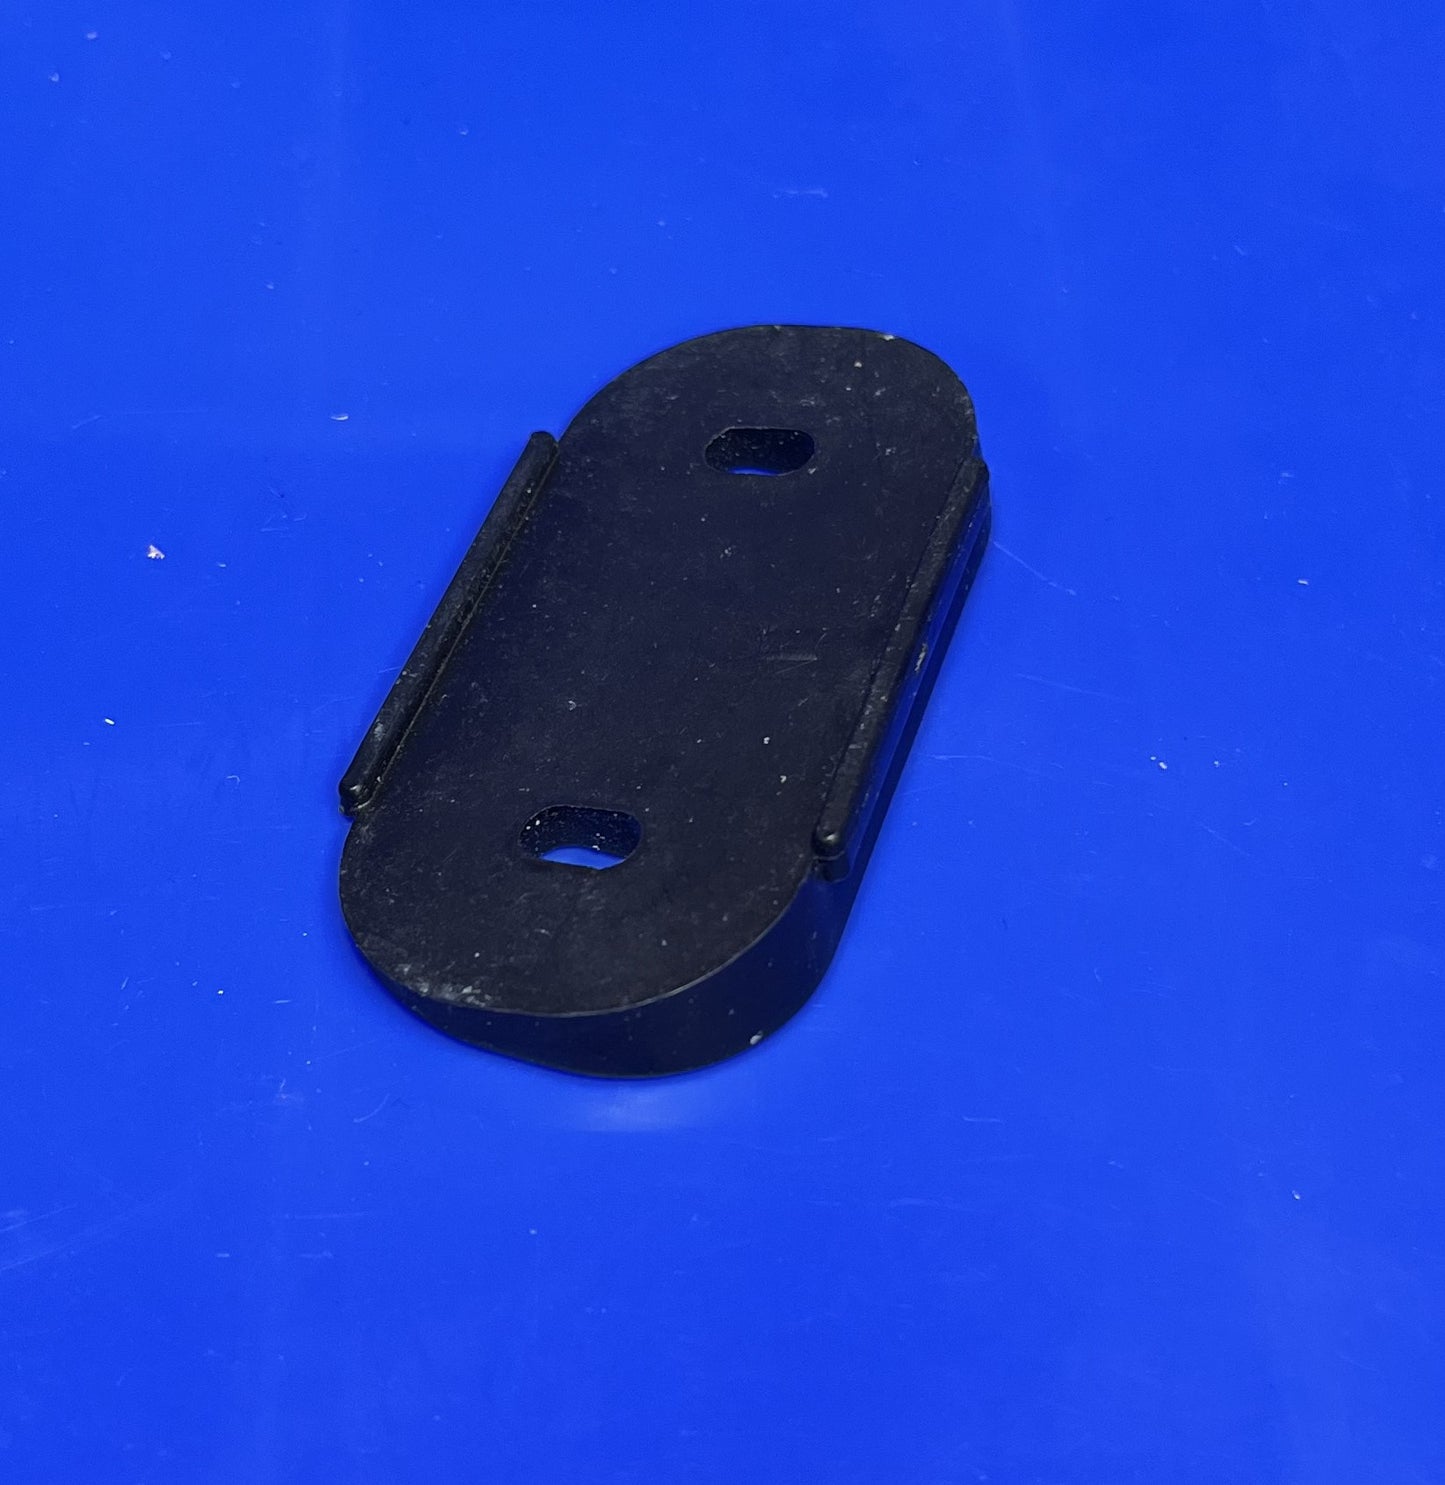 Harken wedge, angled backing plate for cam cleat